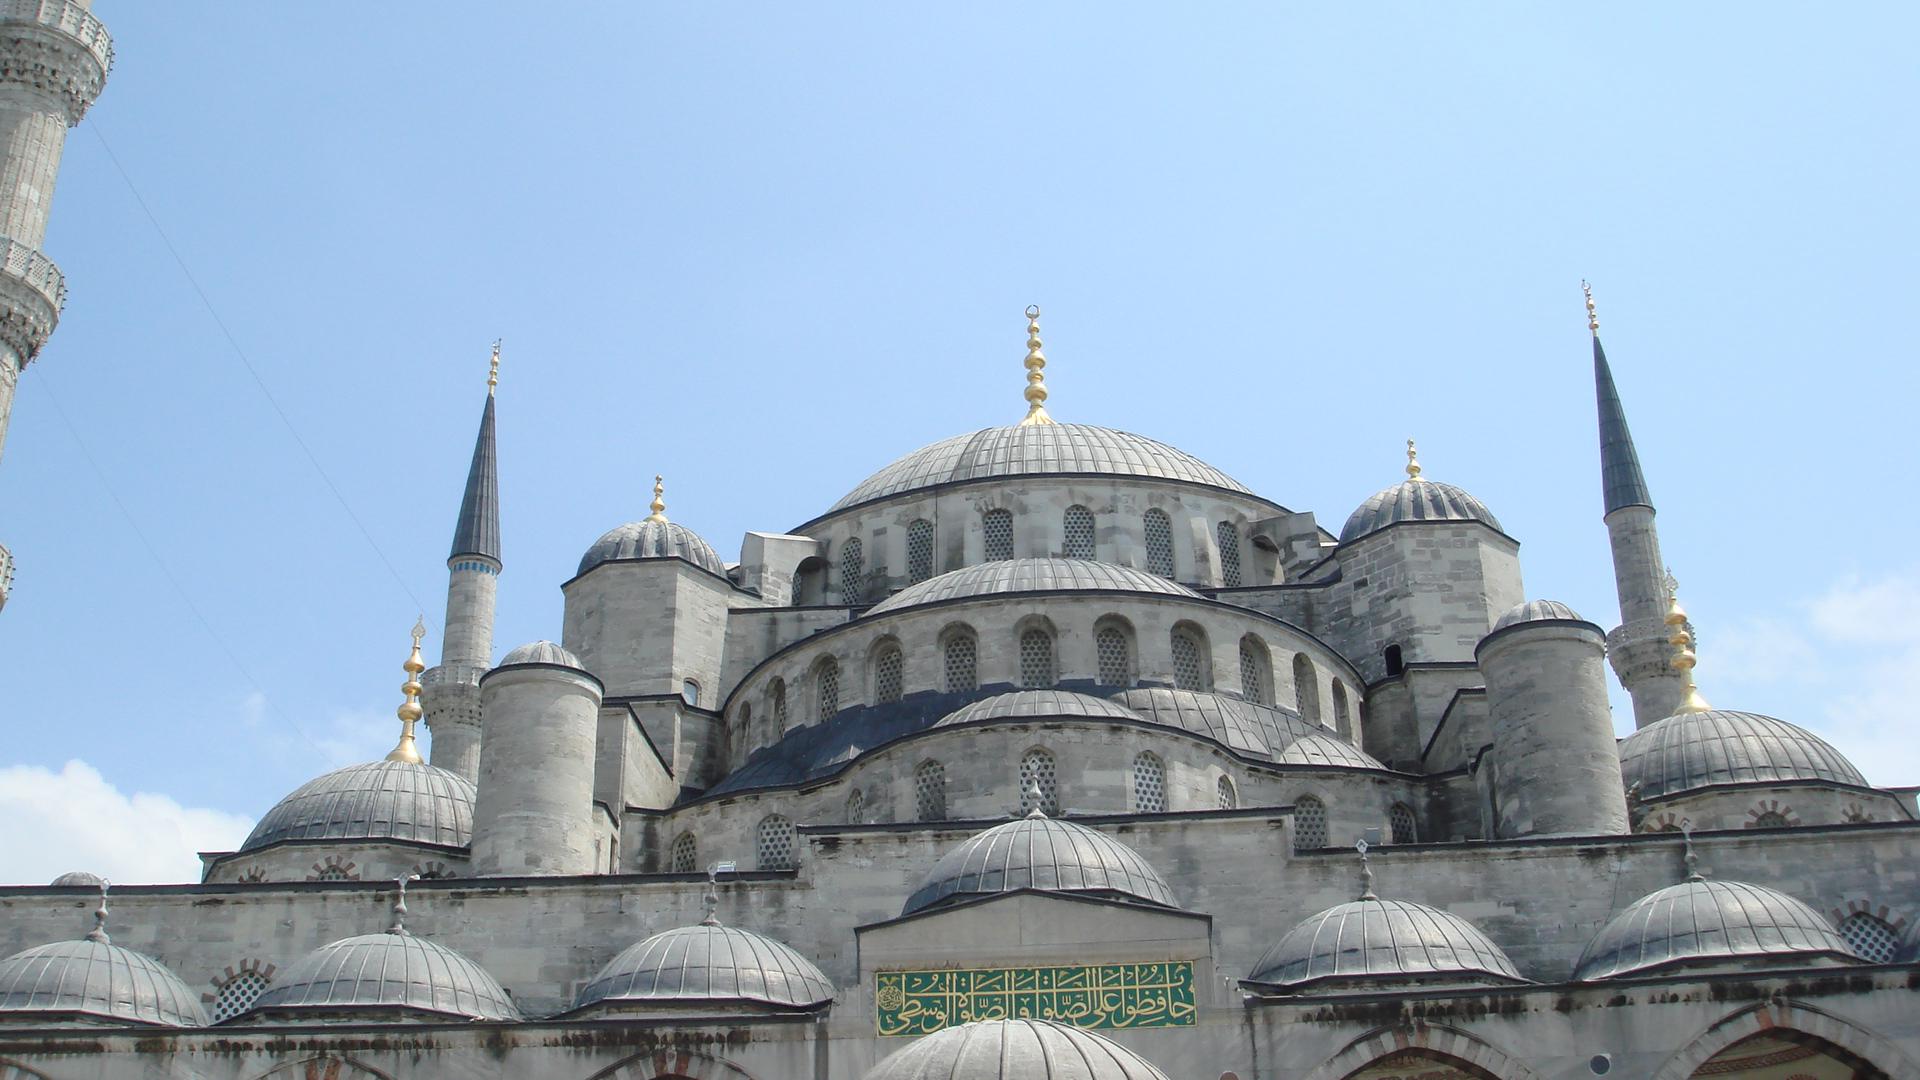 Sultan Ahmed Mosque in Istanbul (6)